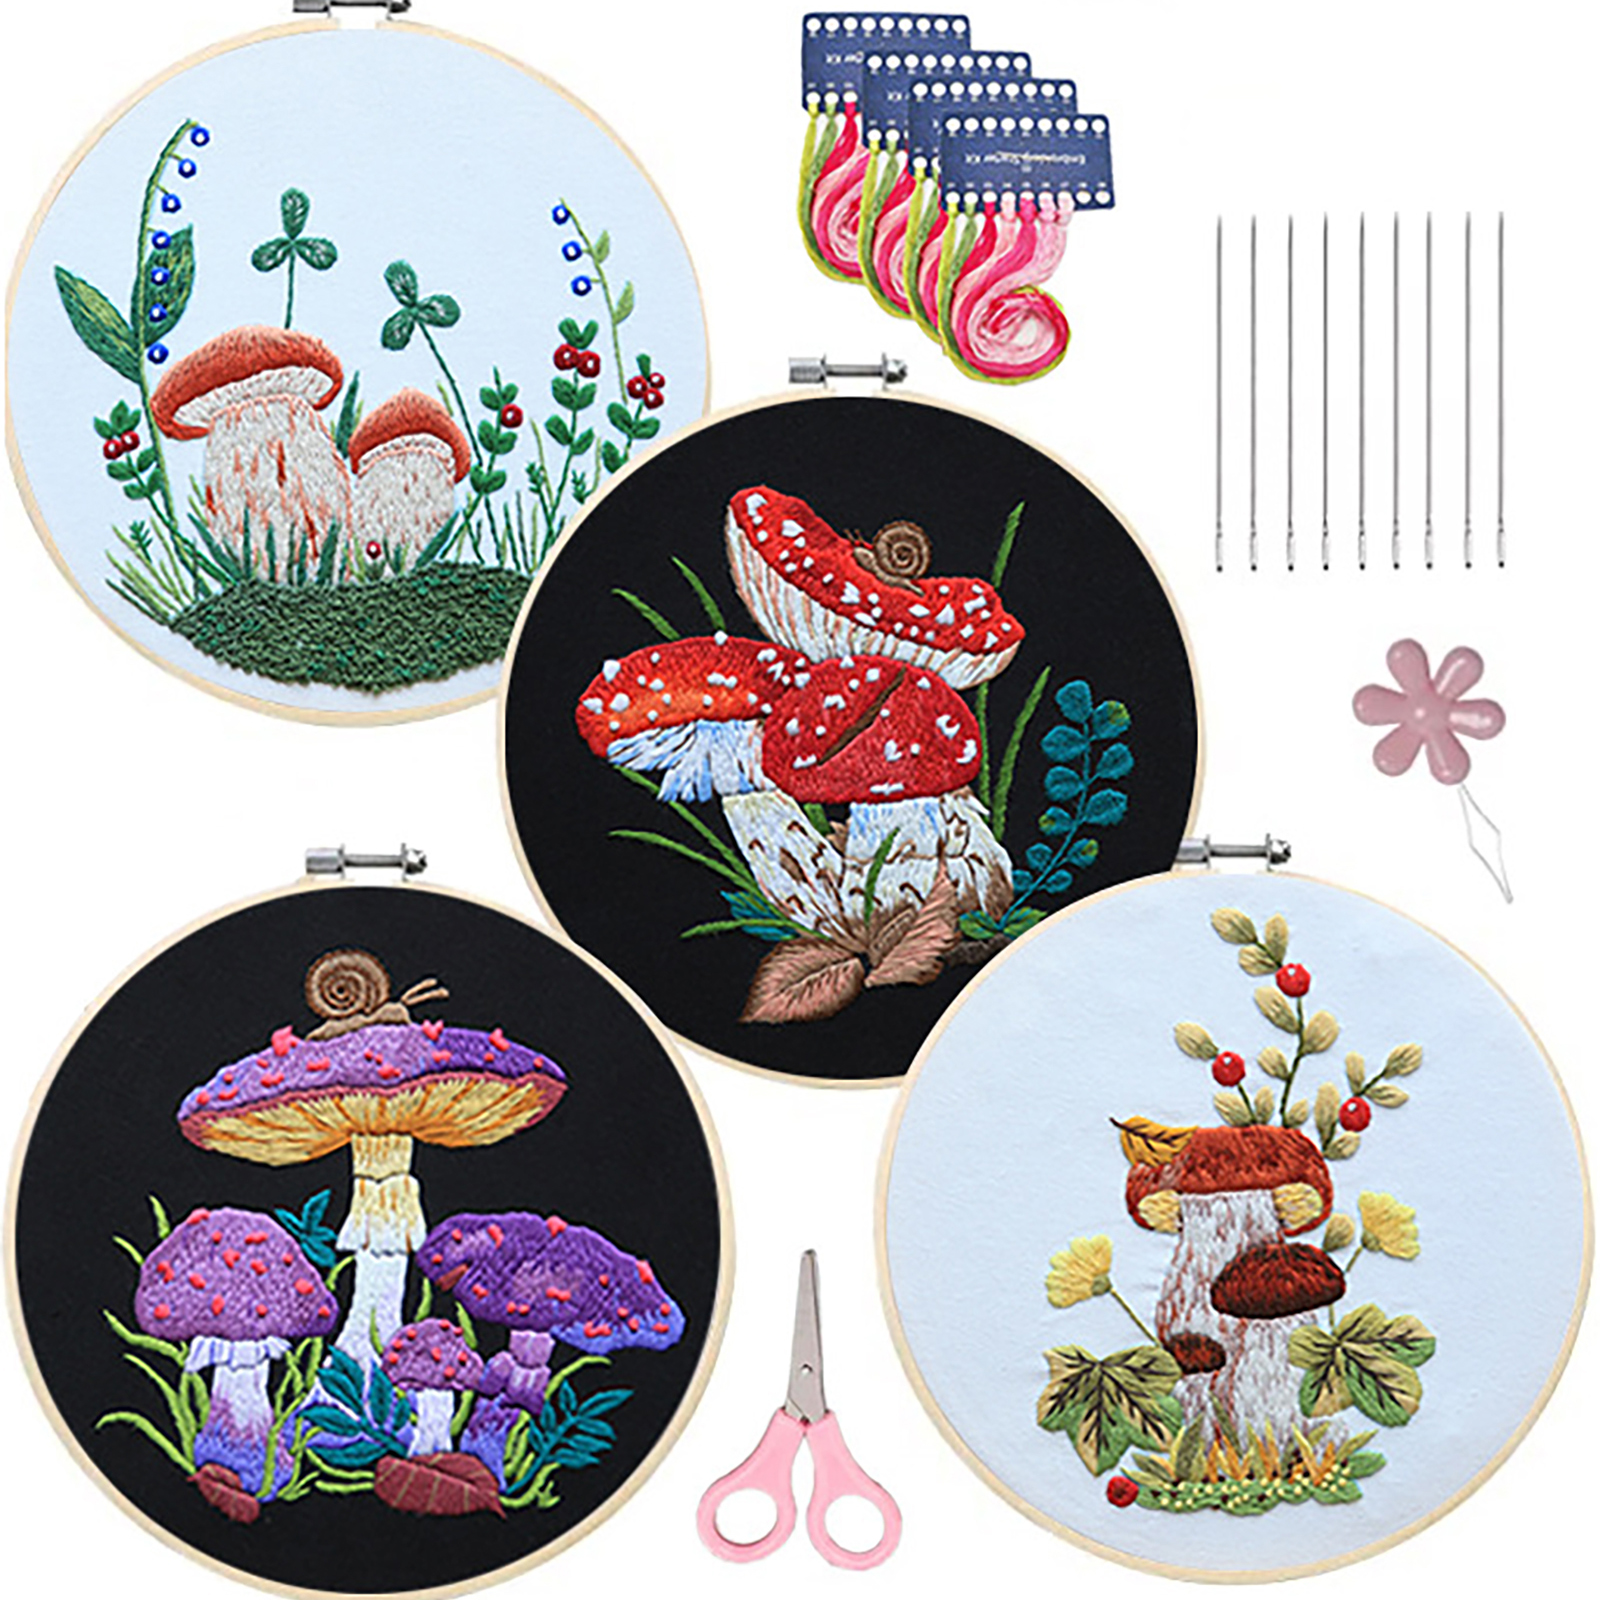 Embroidery Starter Kit With Embroidery Hoops Scissors Needle Threader Colorful Mushrooms Pattern Cross Stitch Starter Kits 4-piece set